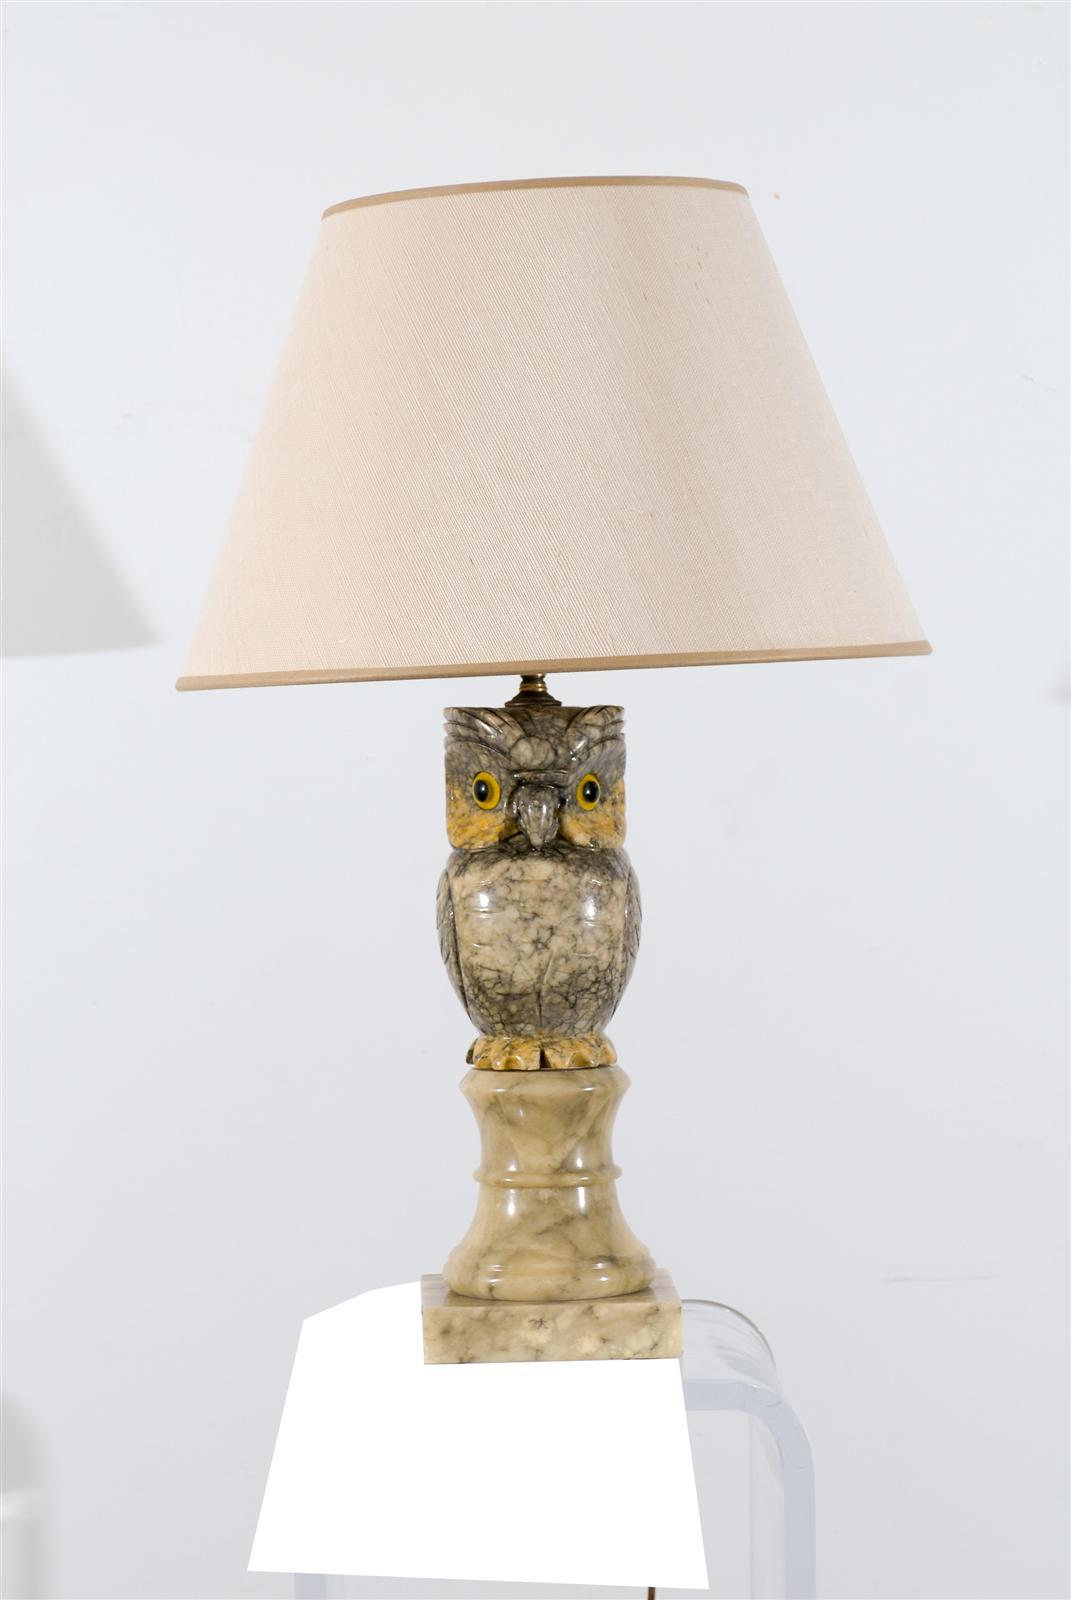 Italian Marble Owl Lamp Circa 1930's with a height of 15.75 inches and a base of 6 inches. Exceptional Design and Coloring of Marble.